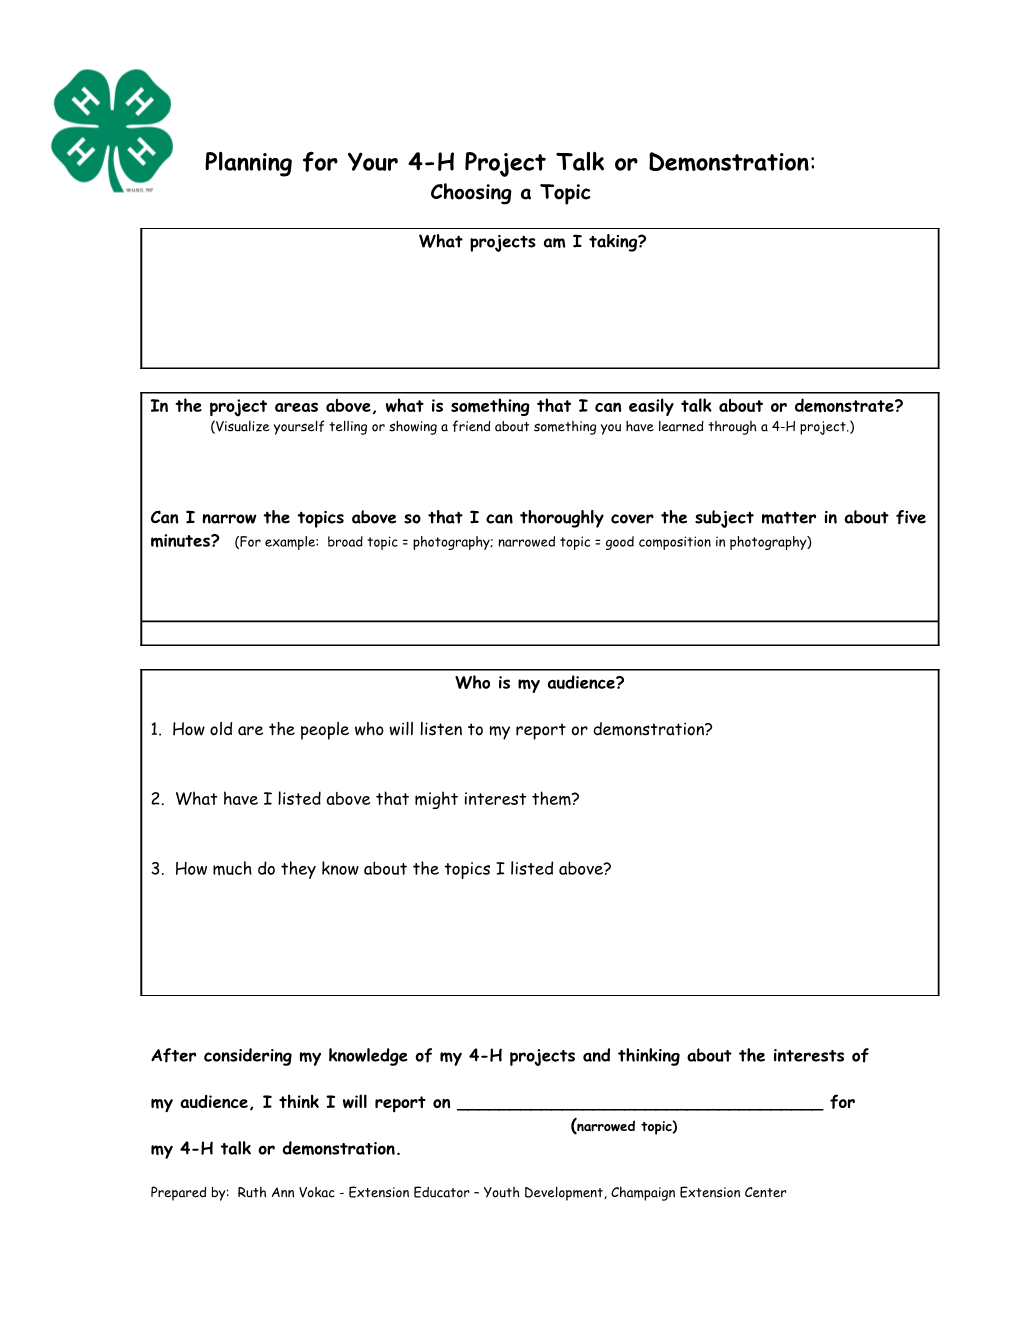 Planning and Delivering Your 4-H Report